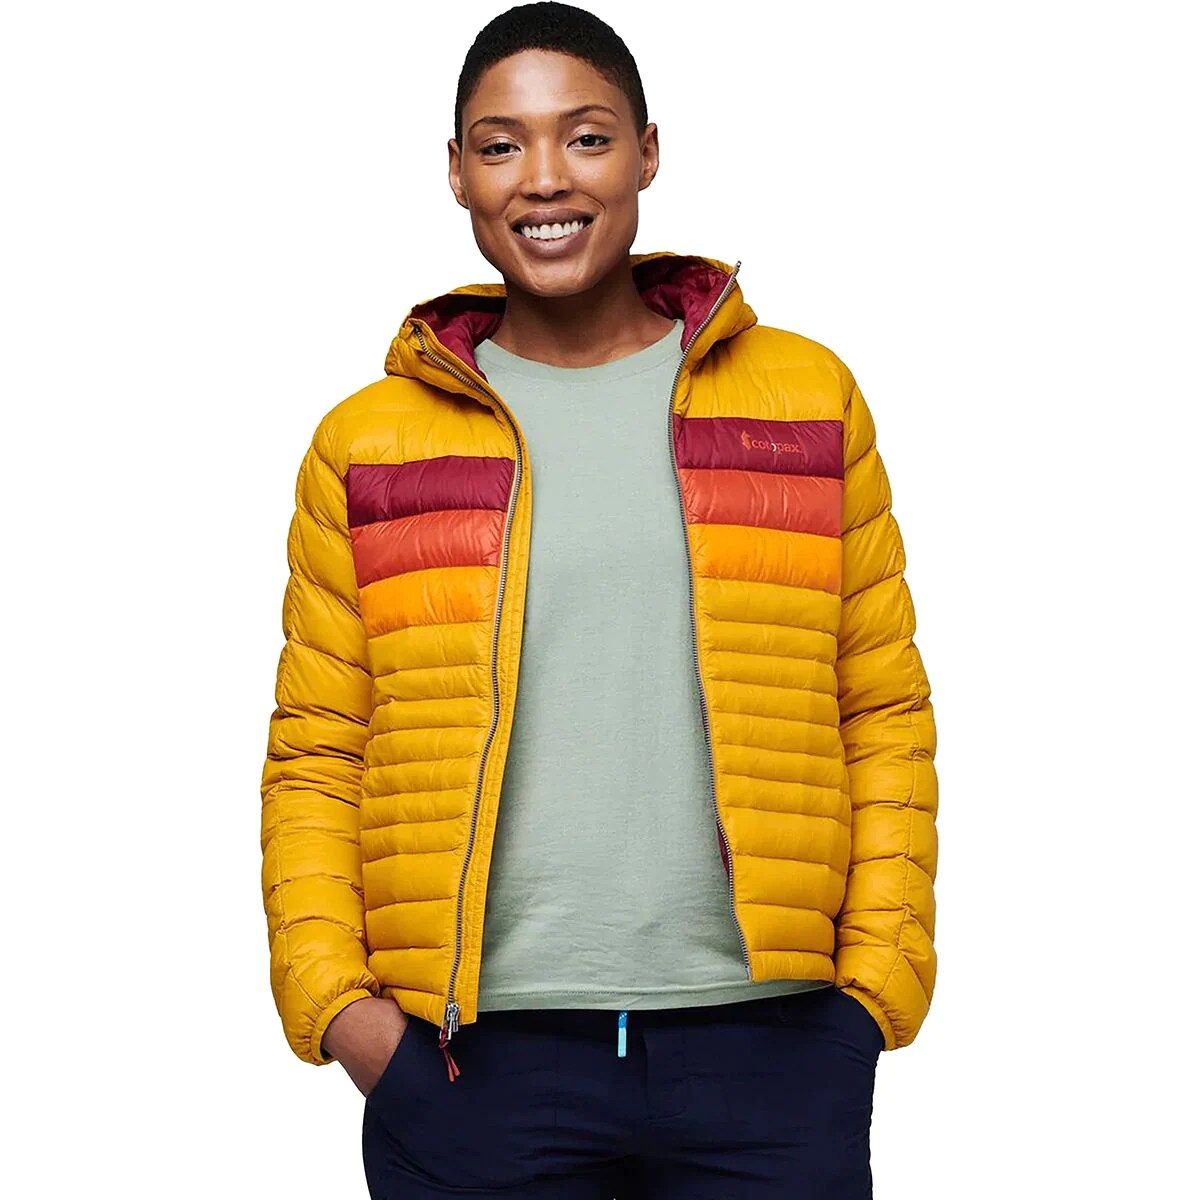 model wearing a yellow, red and orange striped cotopaxi down jacket now on sale at backcountry